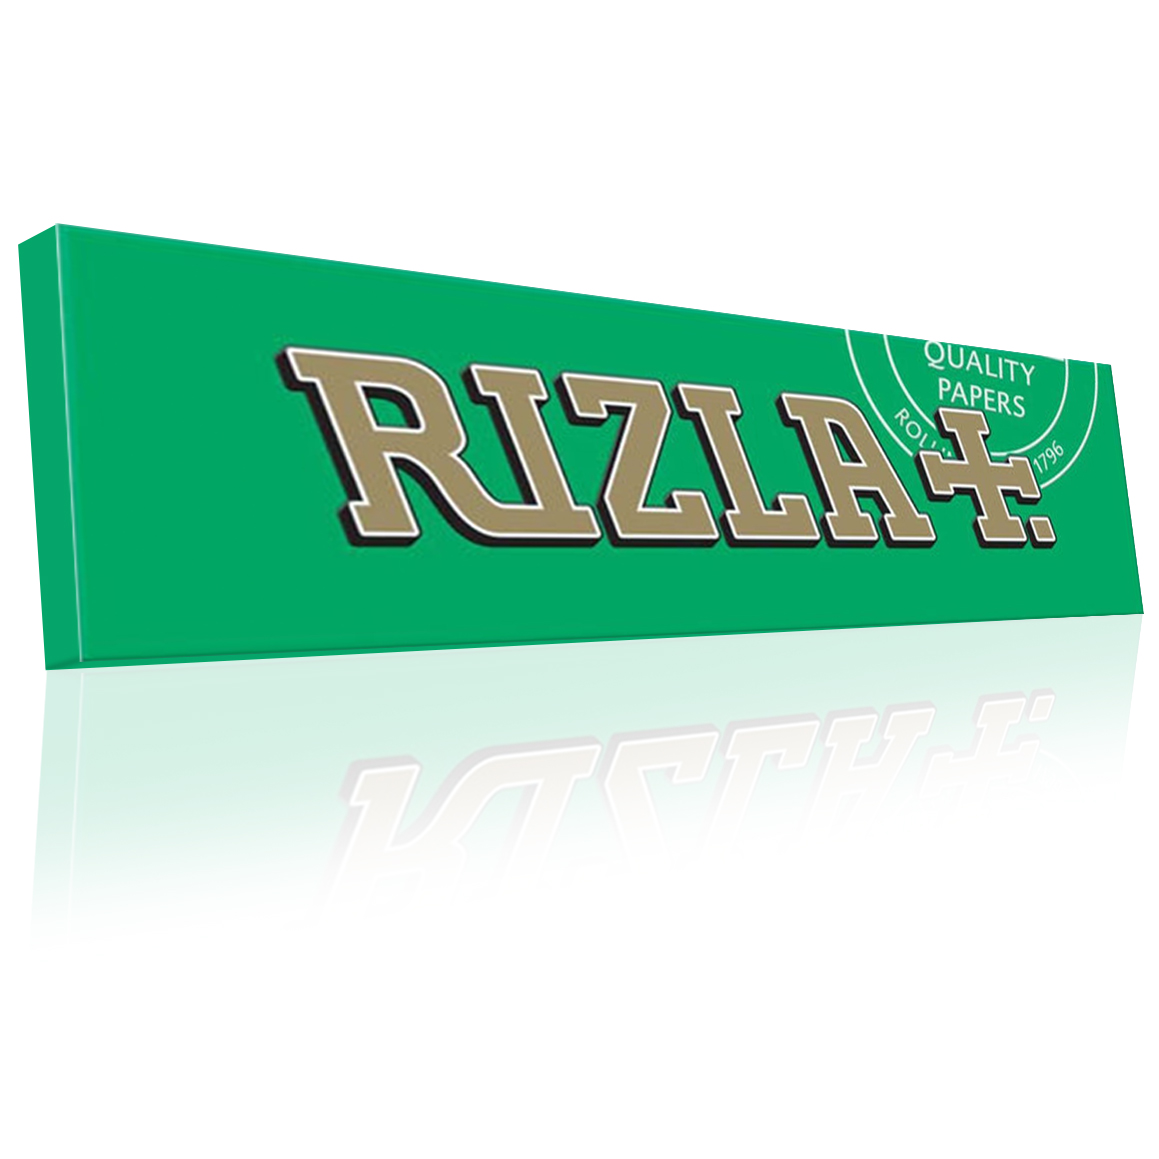 Rizla Green Papers